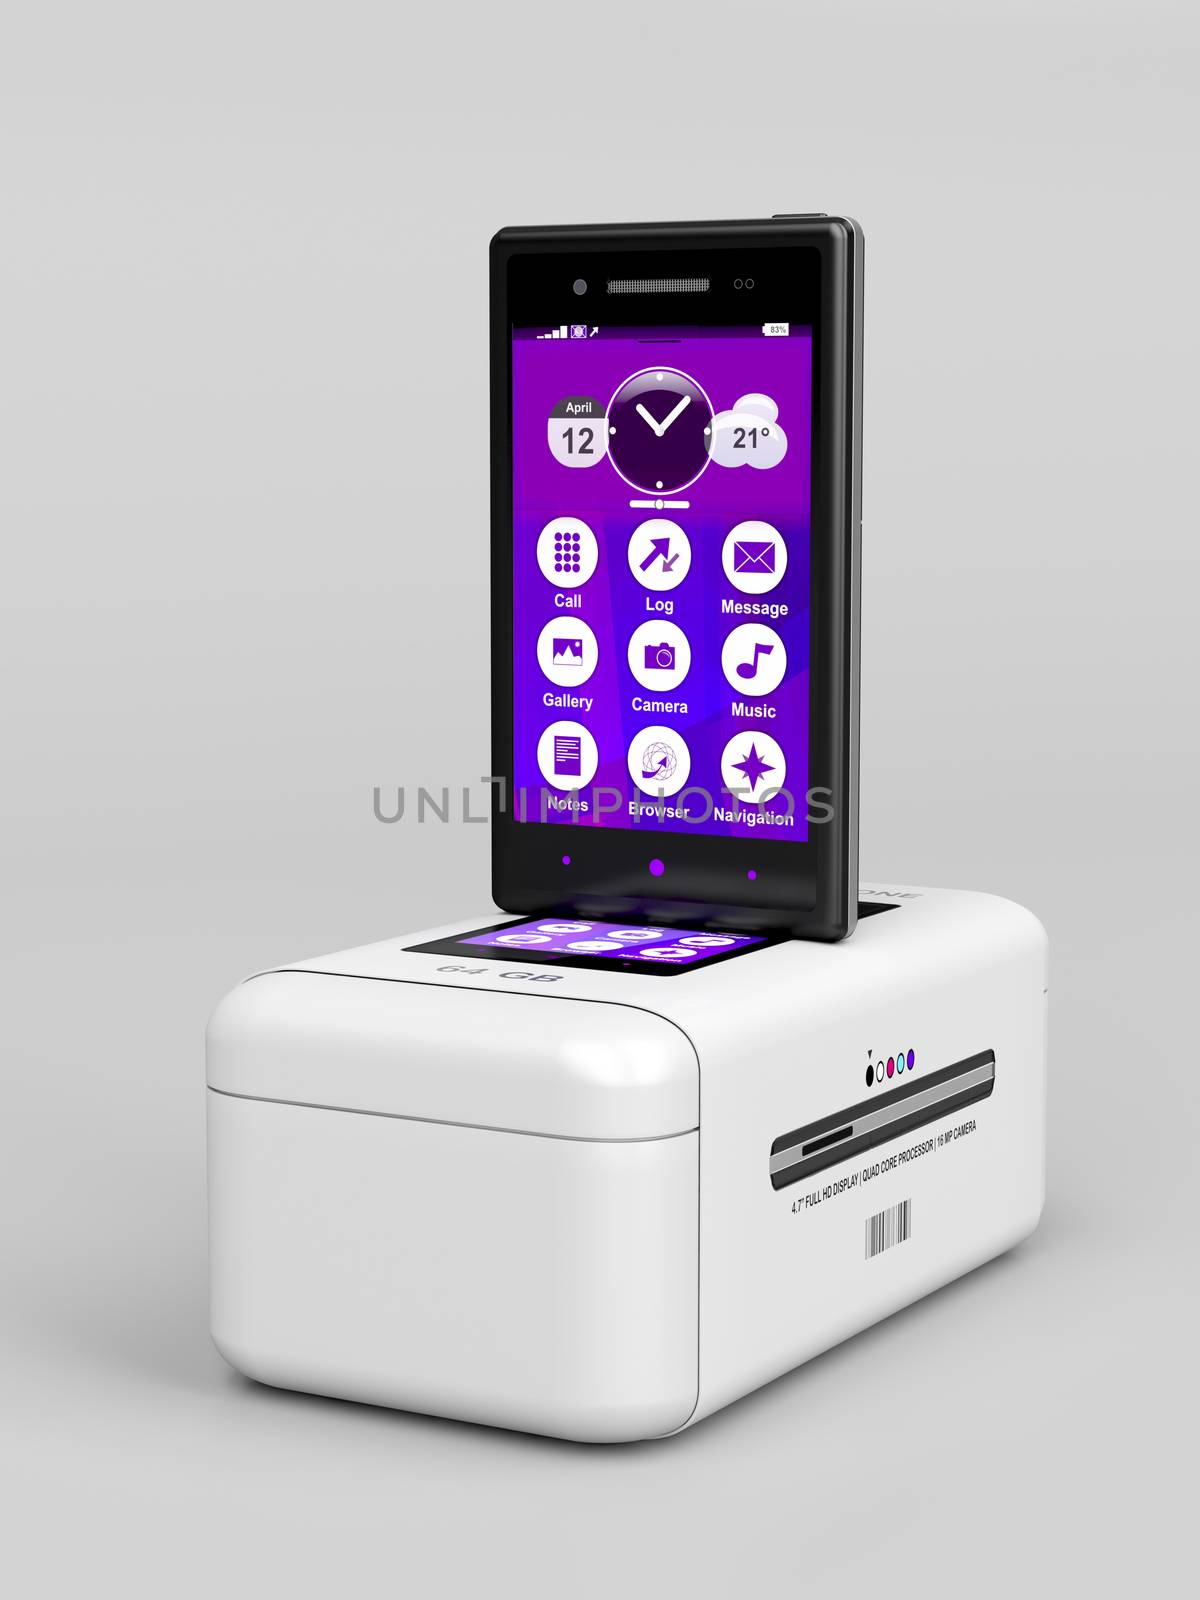 Smartphone with touchscreen and box